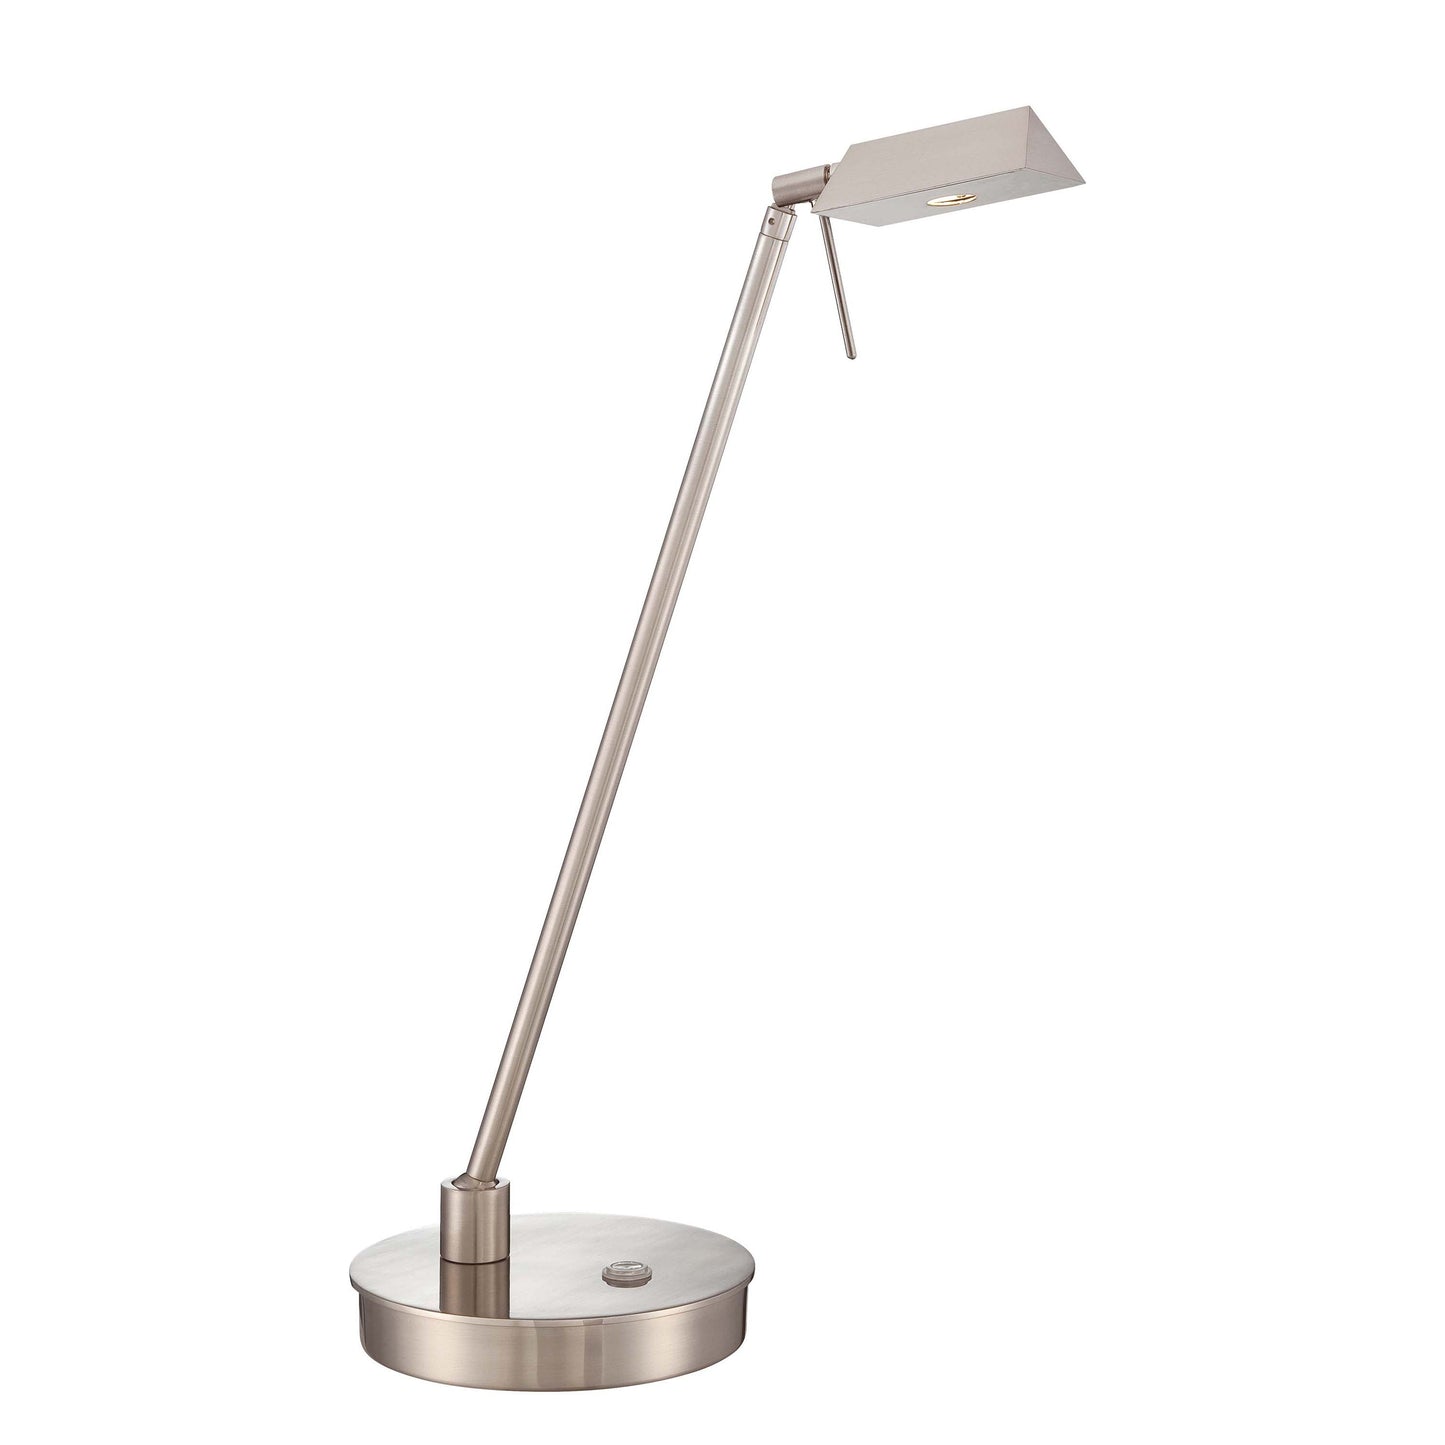 George's Reading Room P4316 LED Pharmacy Table Lamp